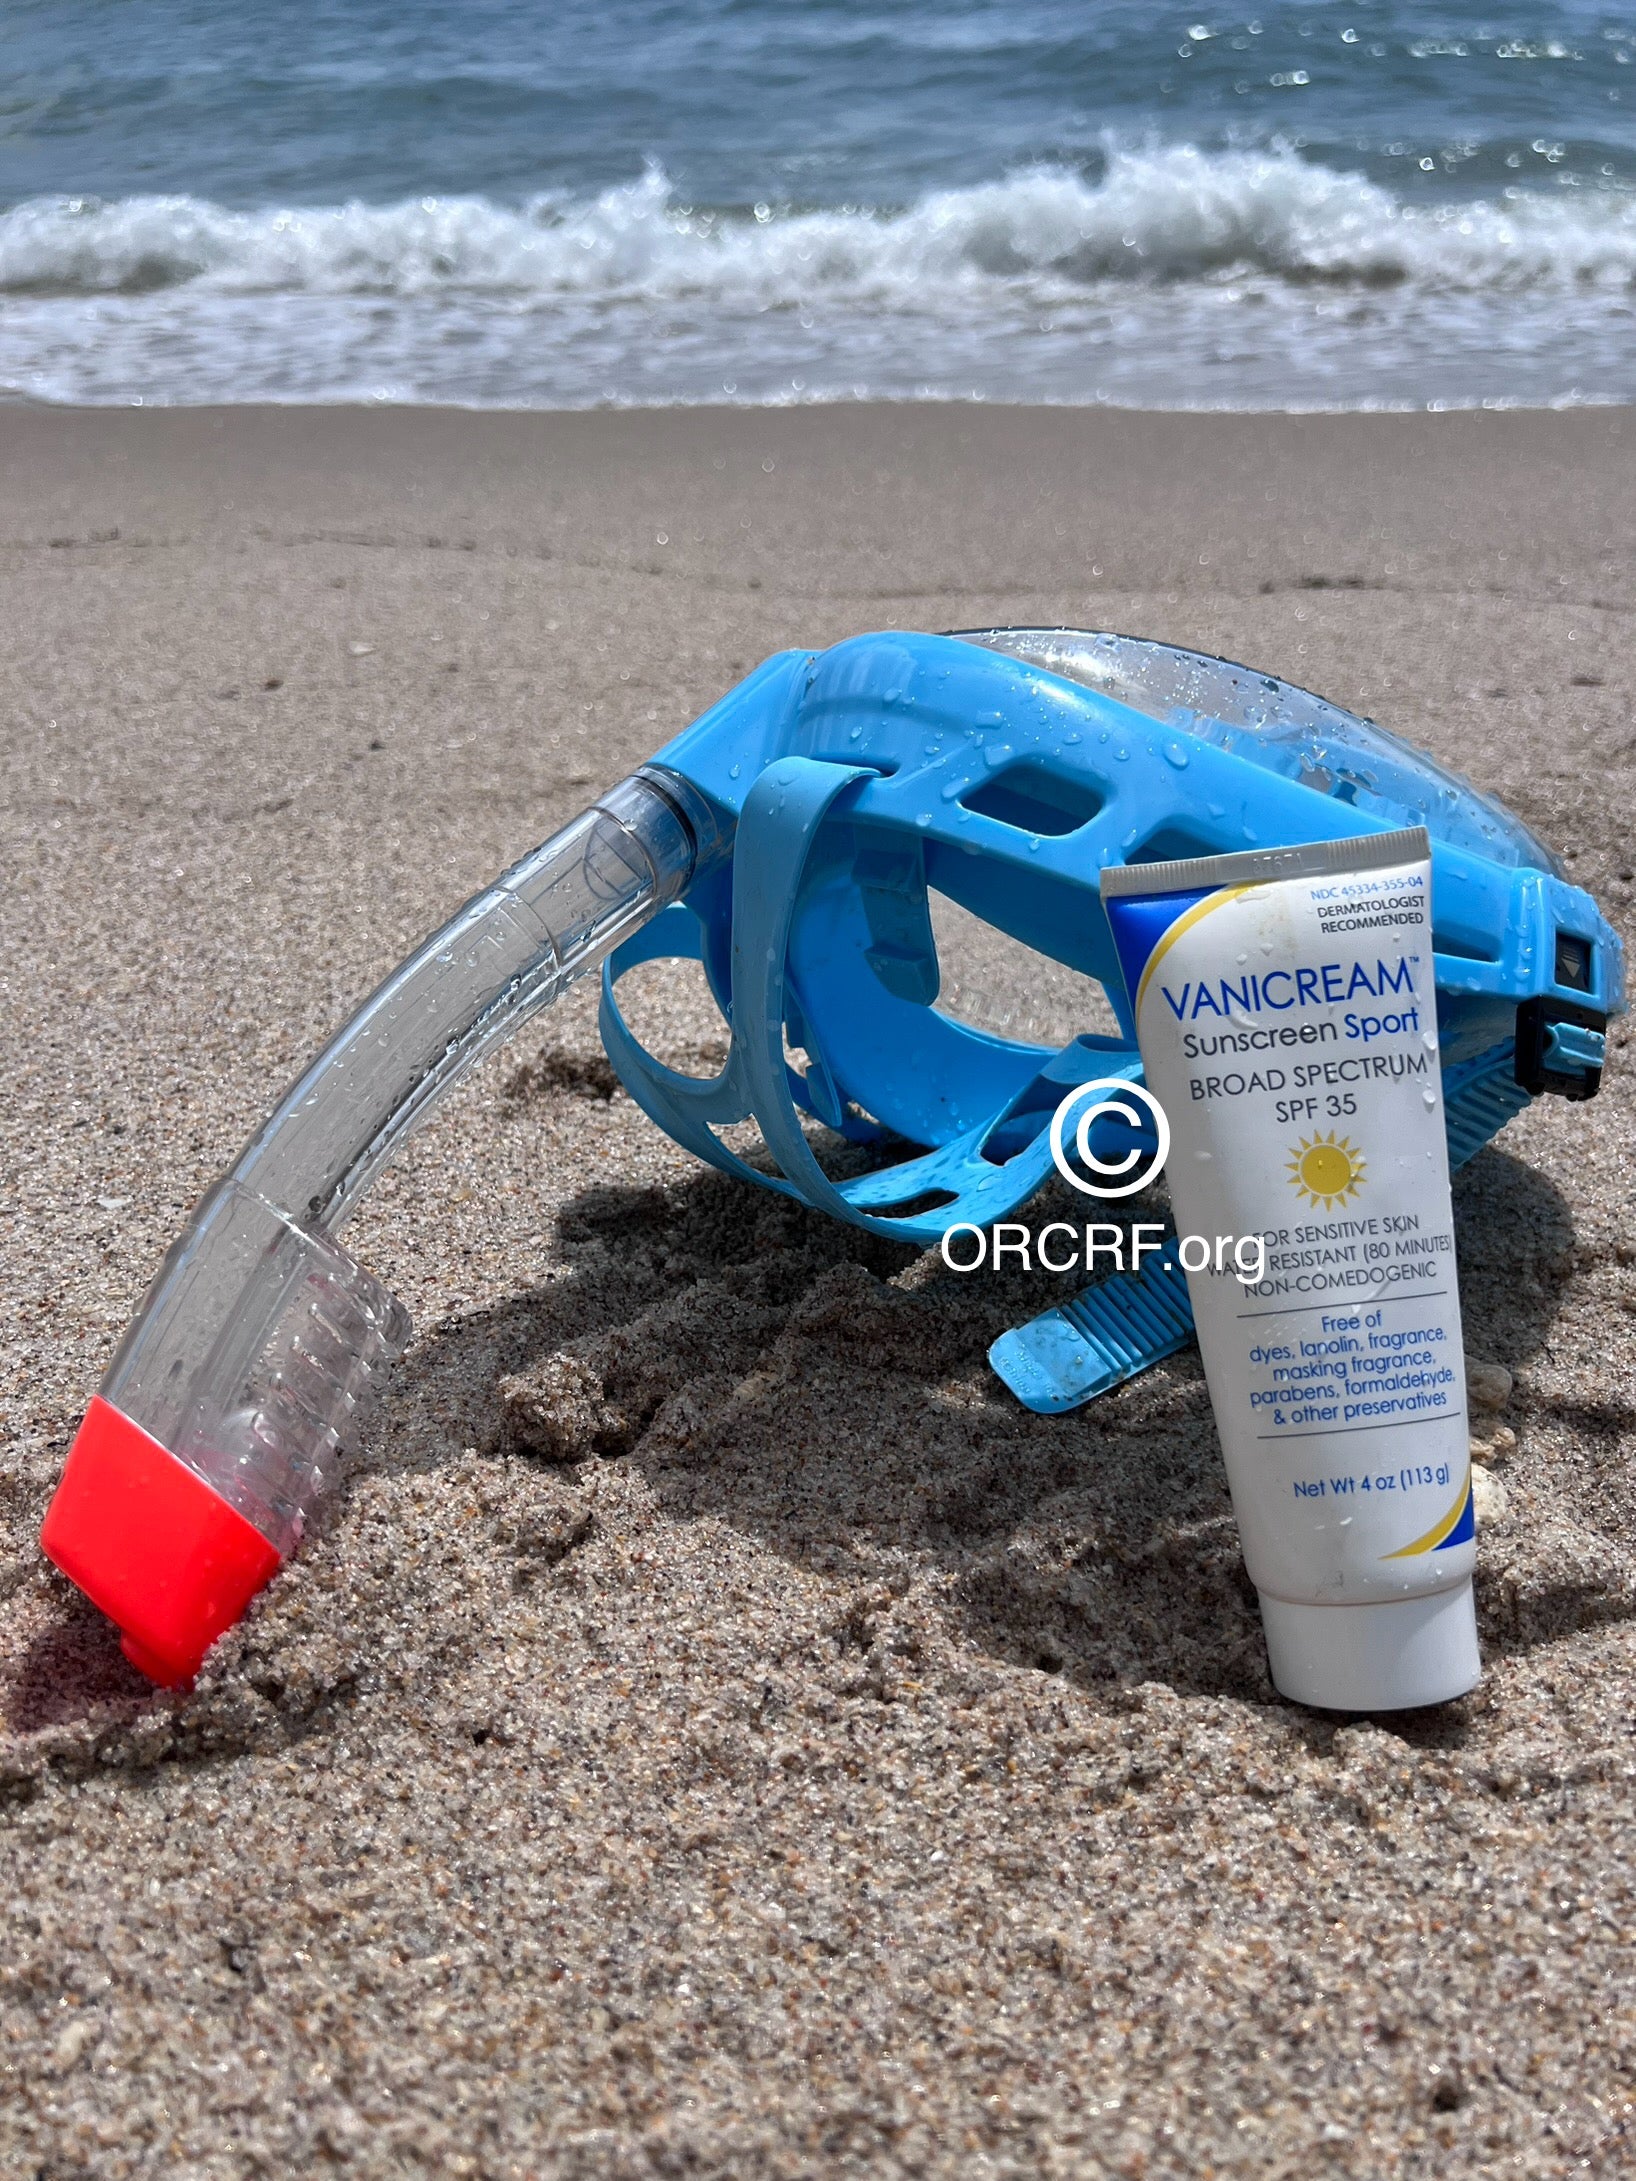 Vanicream SPORT SPF 35+ Water Resistant Broad-Spectrum SUNSCREEN for SENSITIVE SKIN - Supporting ORCRF.org